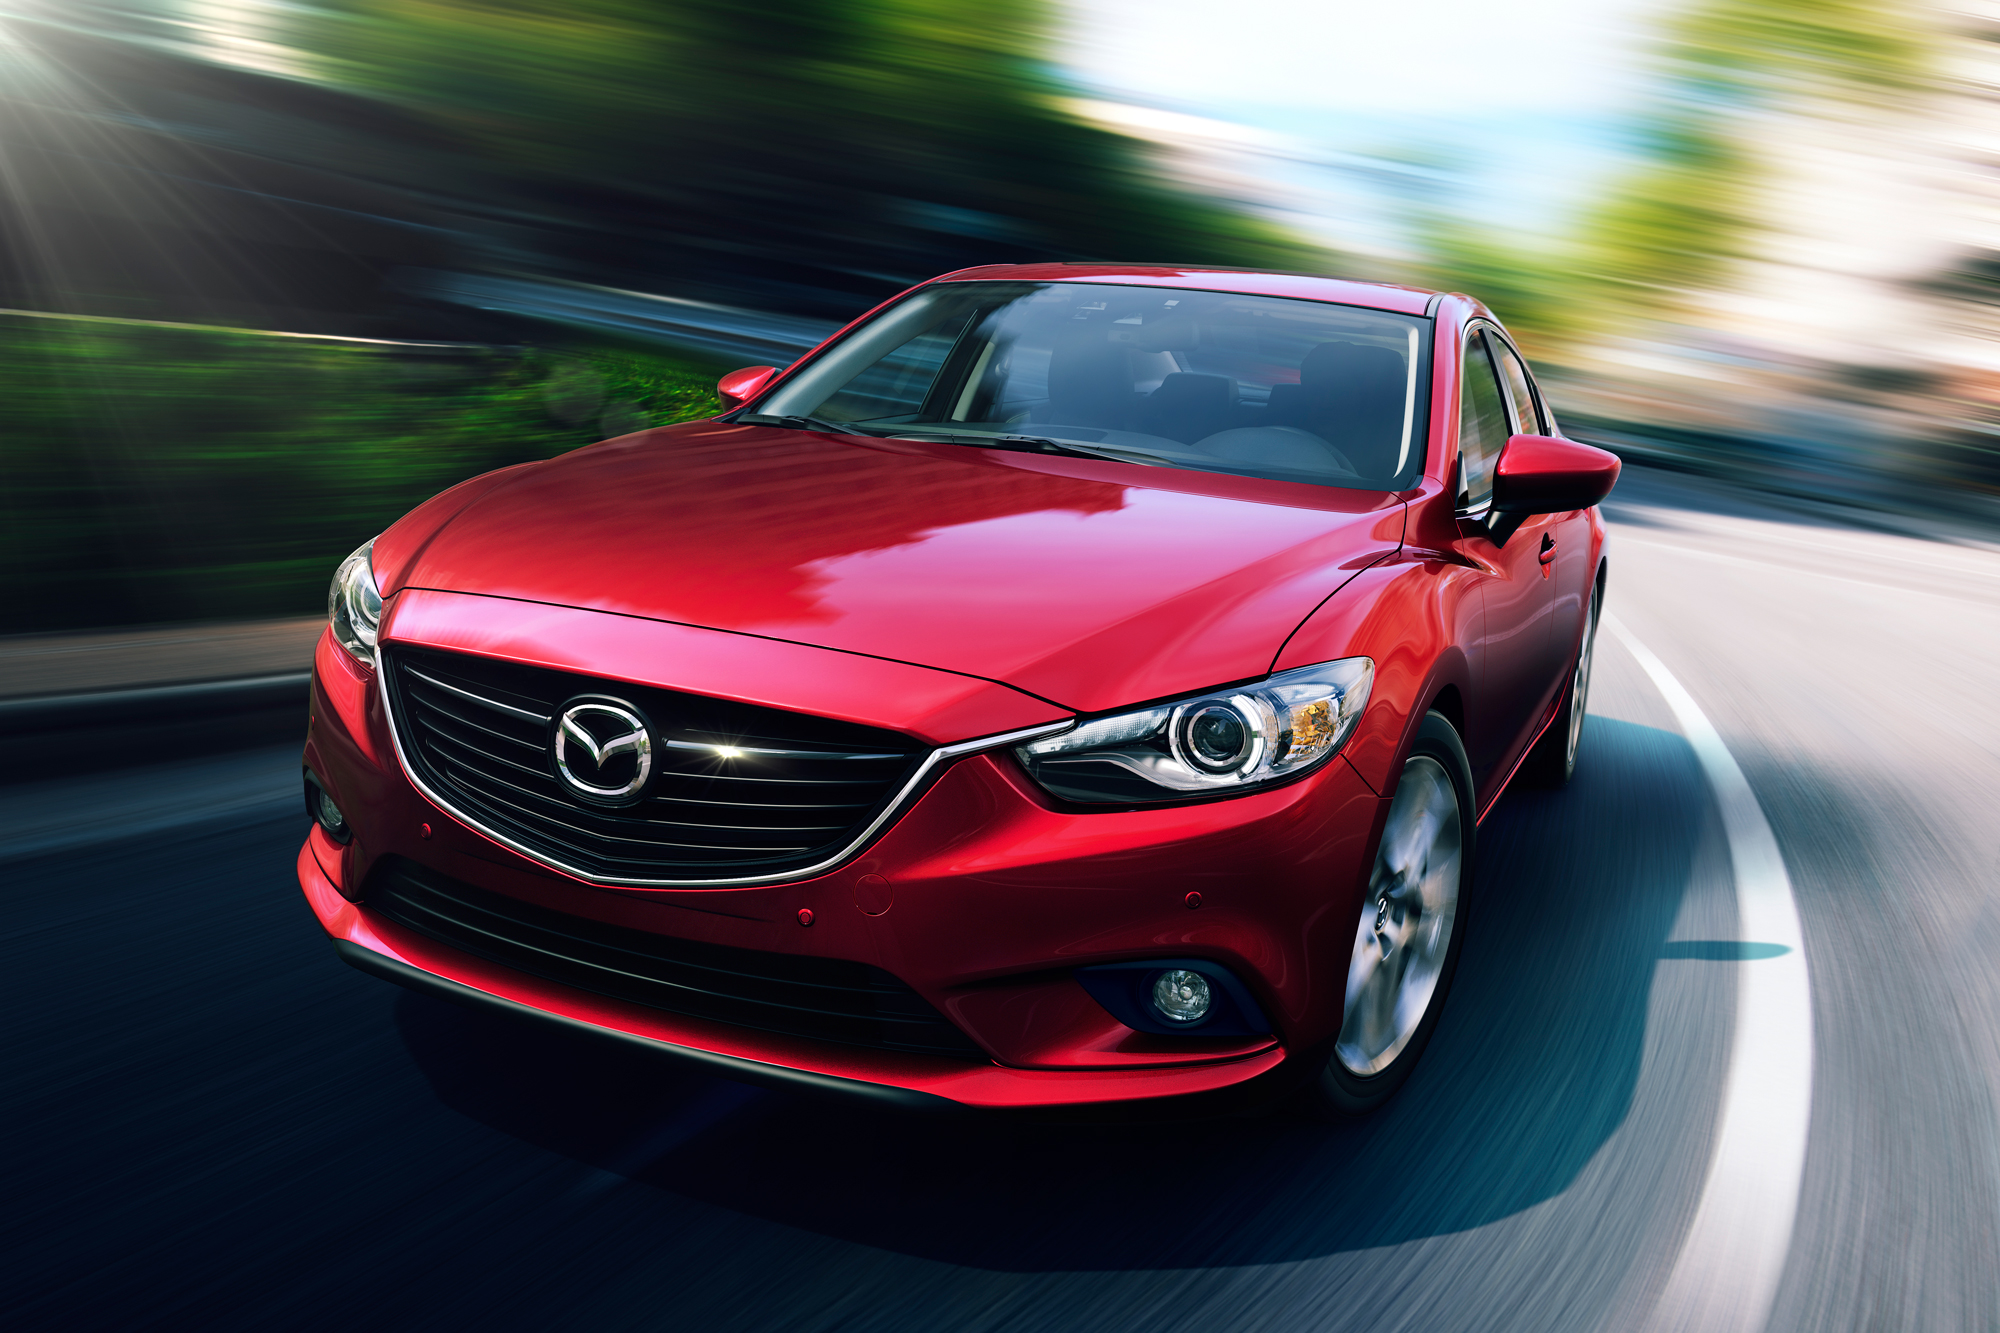 2014 Mazda 6 Review Motoring Middle East Car news